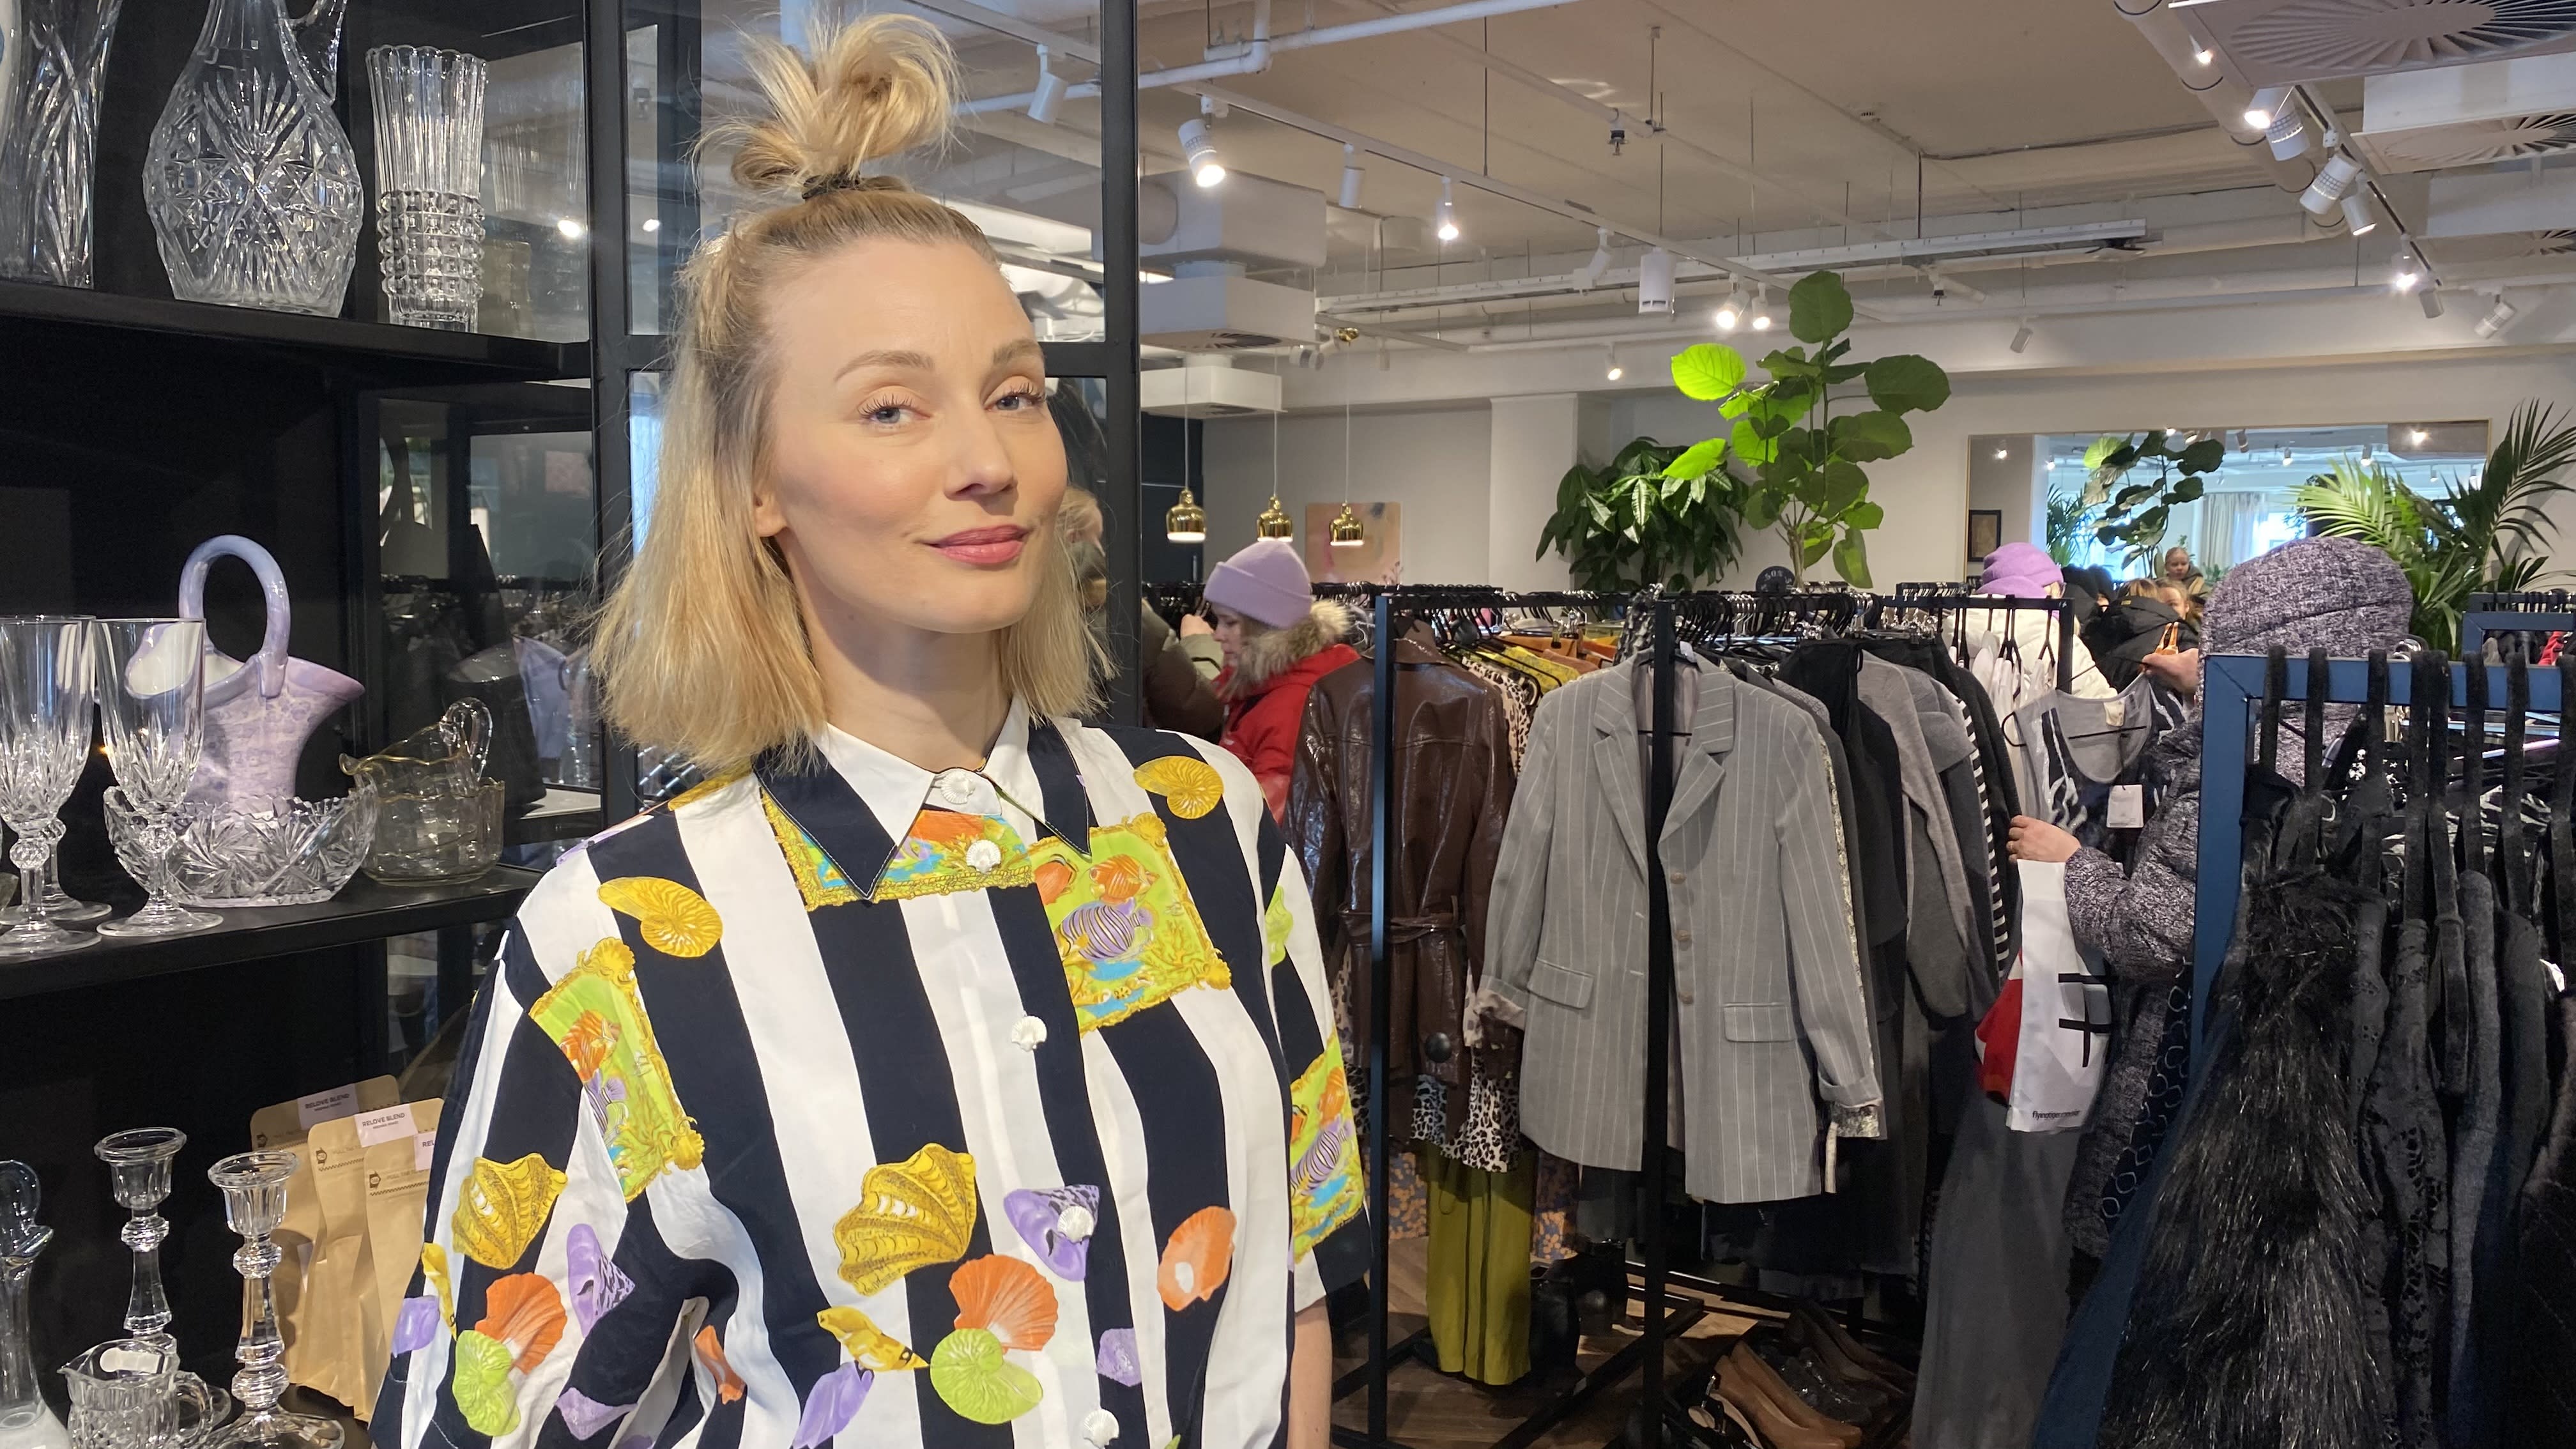 Used clothes find their way onto the shelves of Finnish department stores